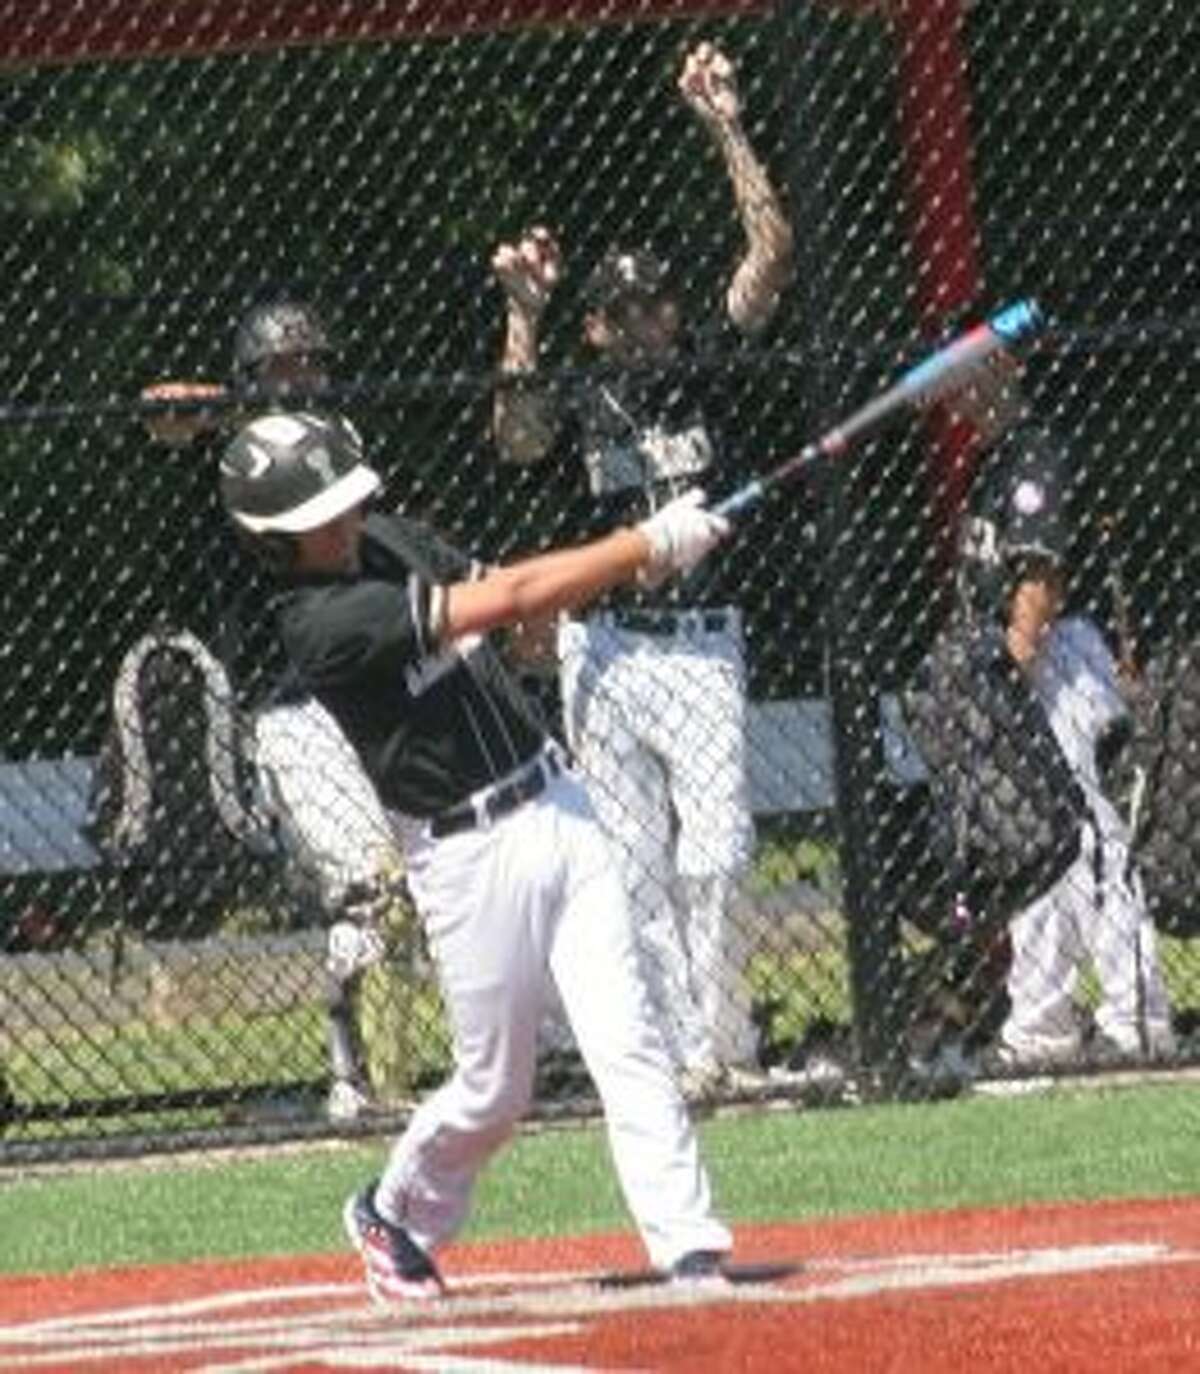 Justin Delaney had one of Trumbull's seven hits against Plymouth (Mass.). — Bill Bloxsom photo